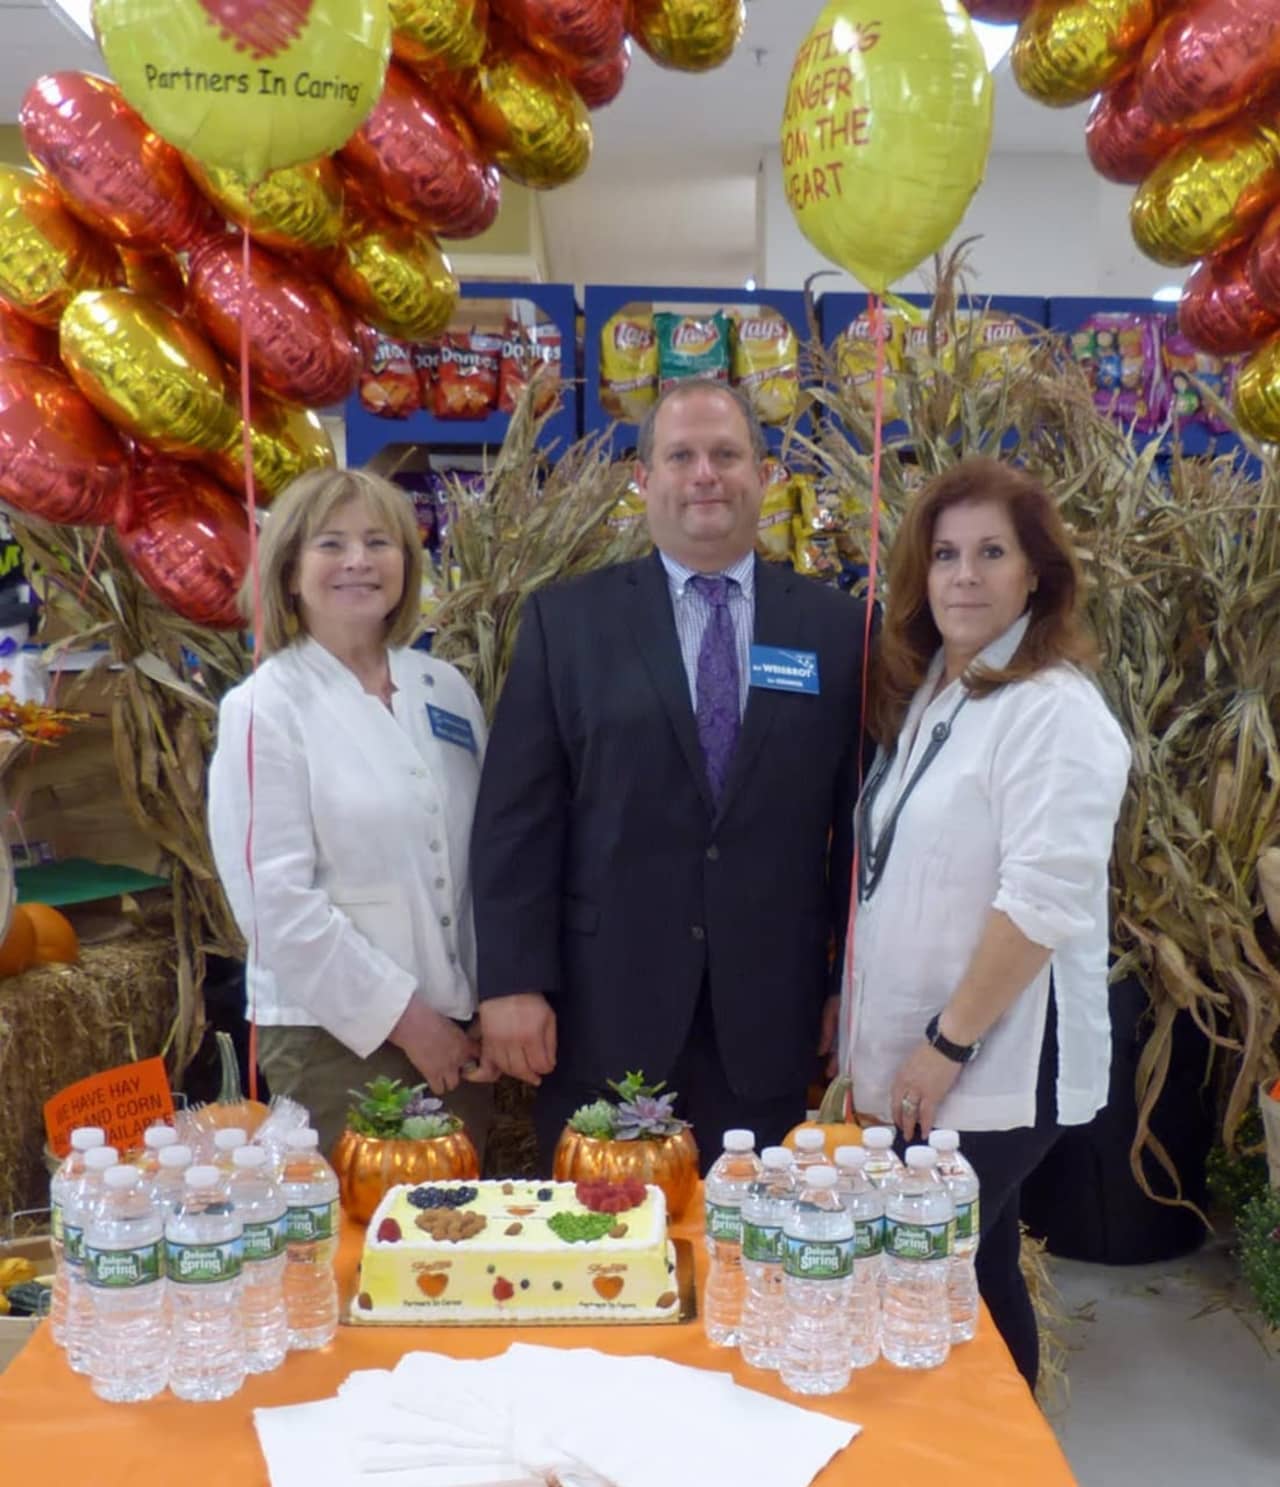 Shown at the New Milford ShopRite are, from left, Councilwoman Hedy Grant, Ari Weisbrot, and Councilwoman Thea Sirocchi-Hurley.